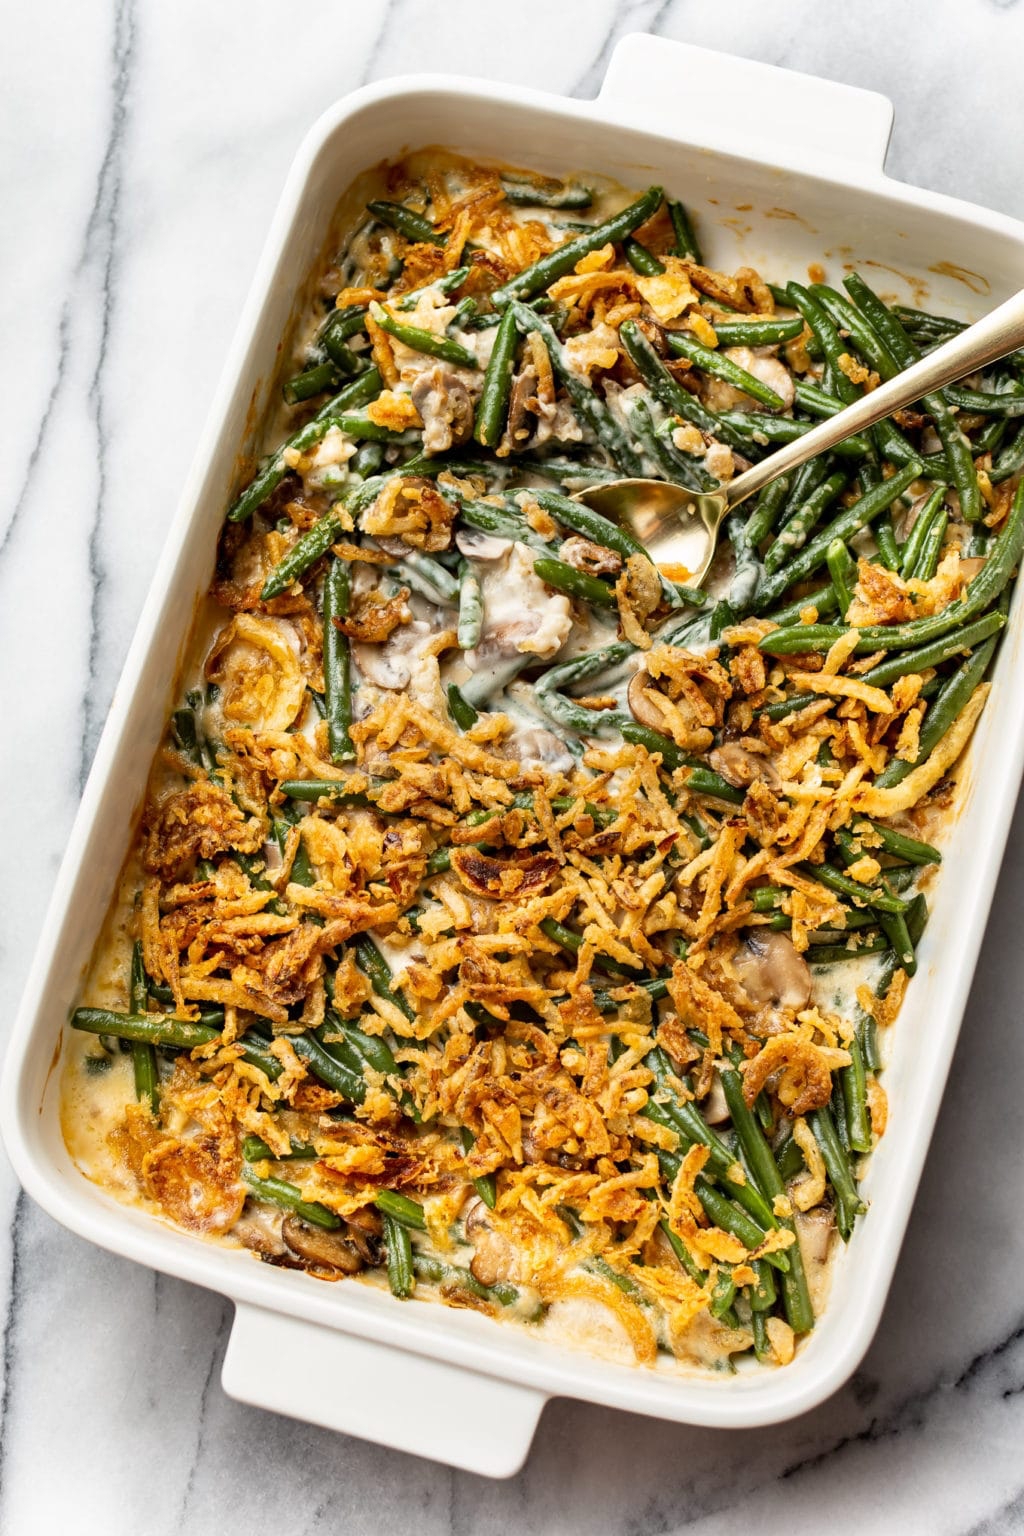 A Taste of Tradition: How to Make The Perfect Green Bean Casserole